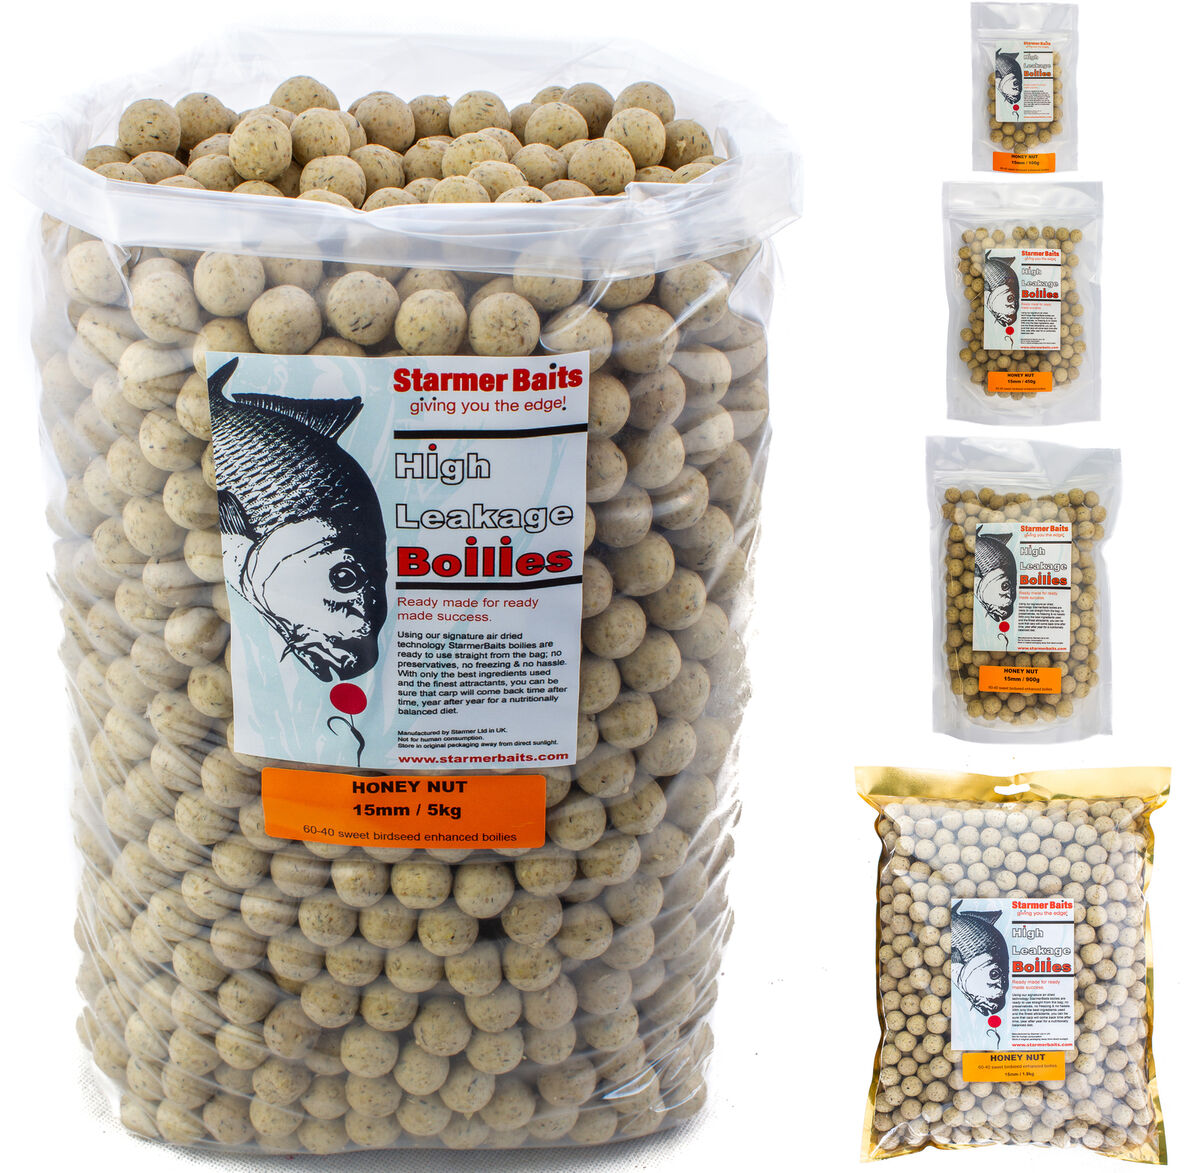 Honey nut air dried shelf life boilies for carp and coarse fishing